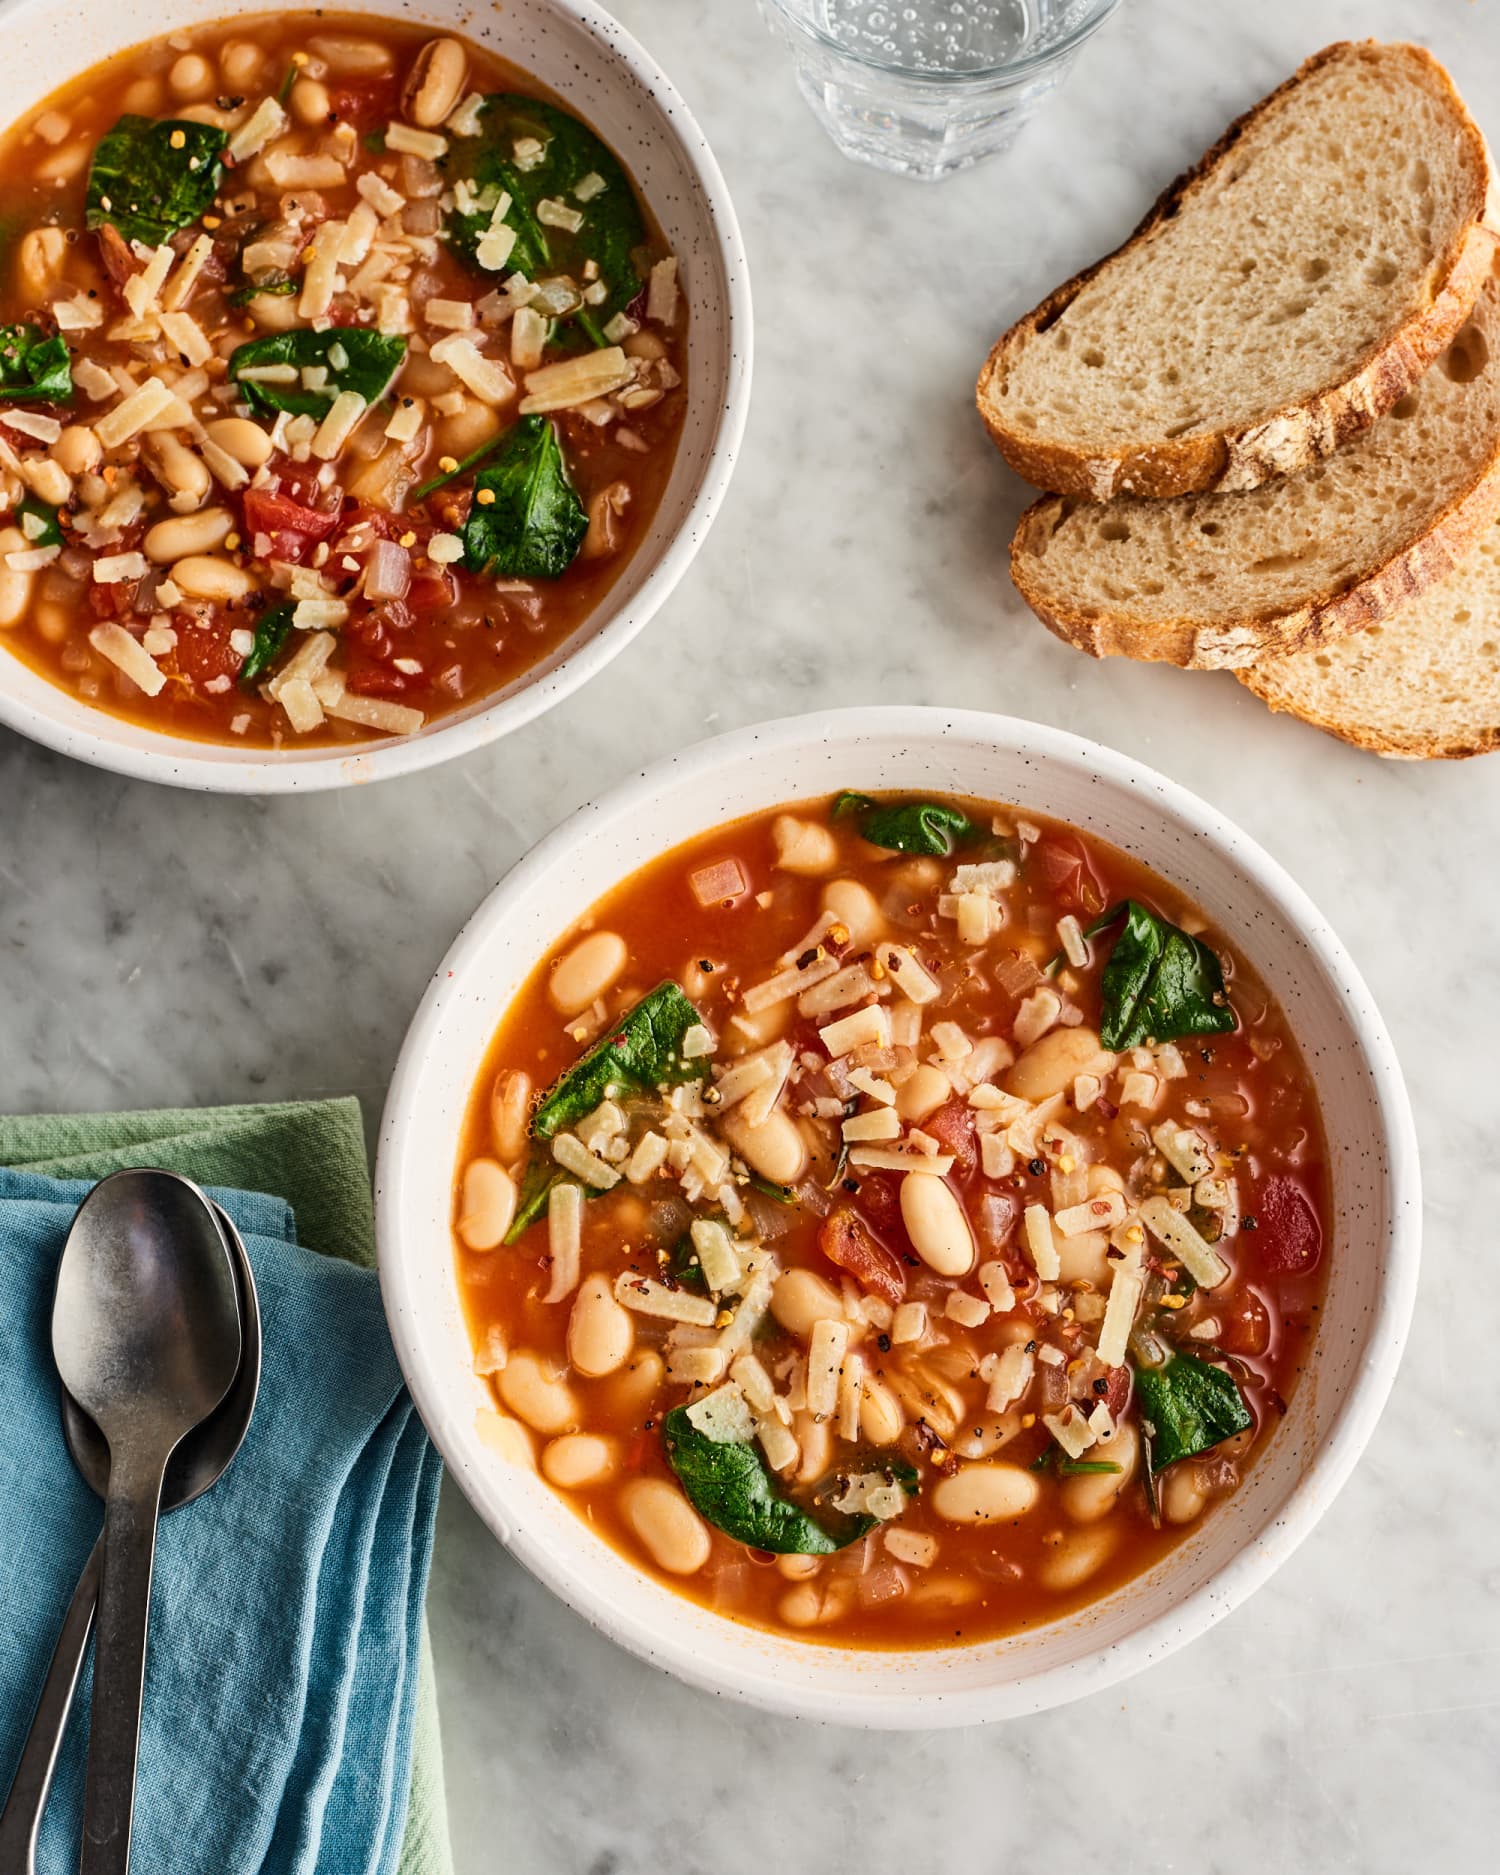 This Feel-Good Mediterranean Soup Is the Best Way to Turn a Can of White Beans Into Dinner